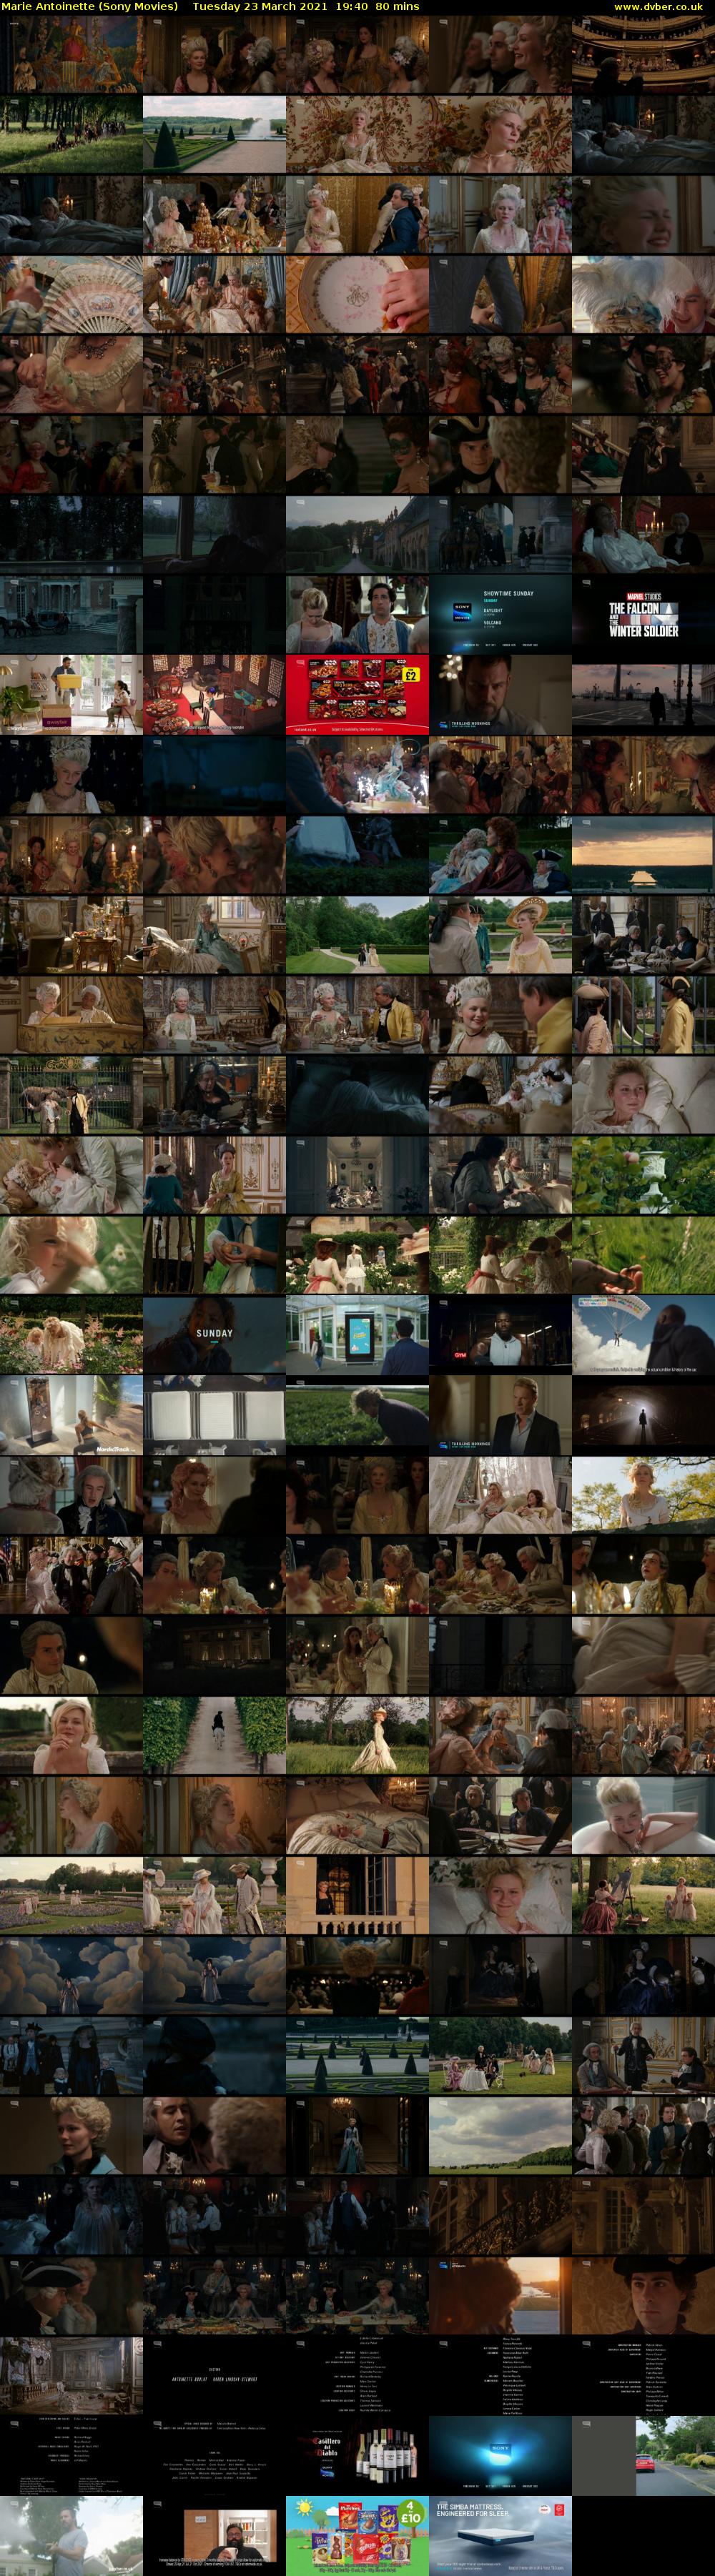 Marie Antoinette (Sony Movies) Tuesday 23 March 2021 19:40 - 21:00